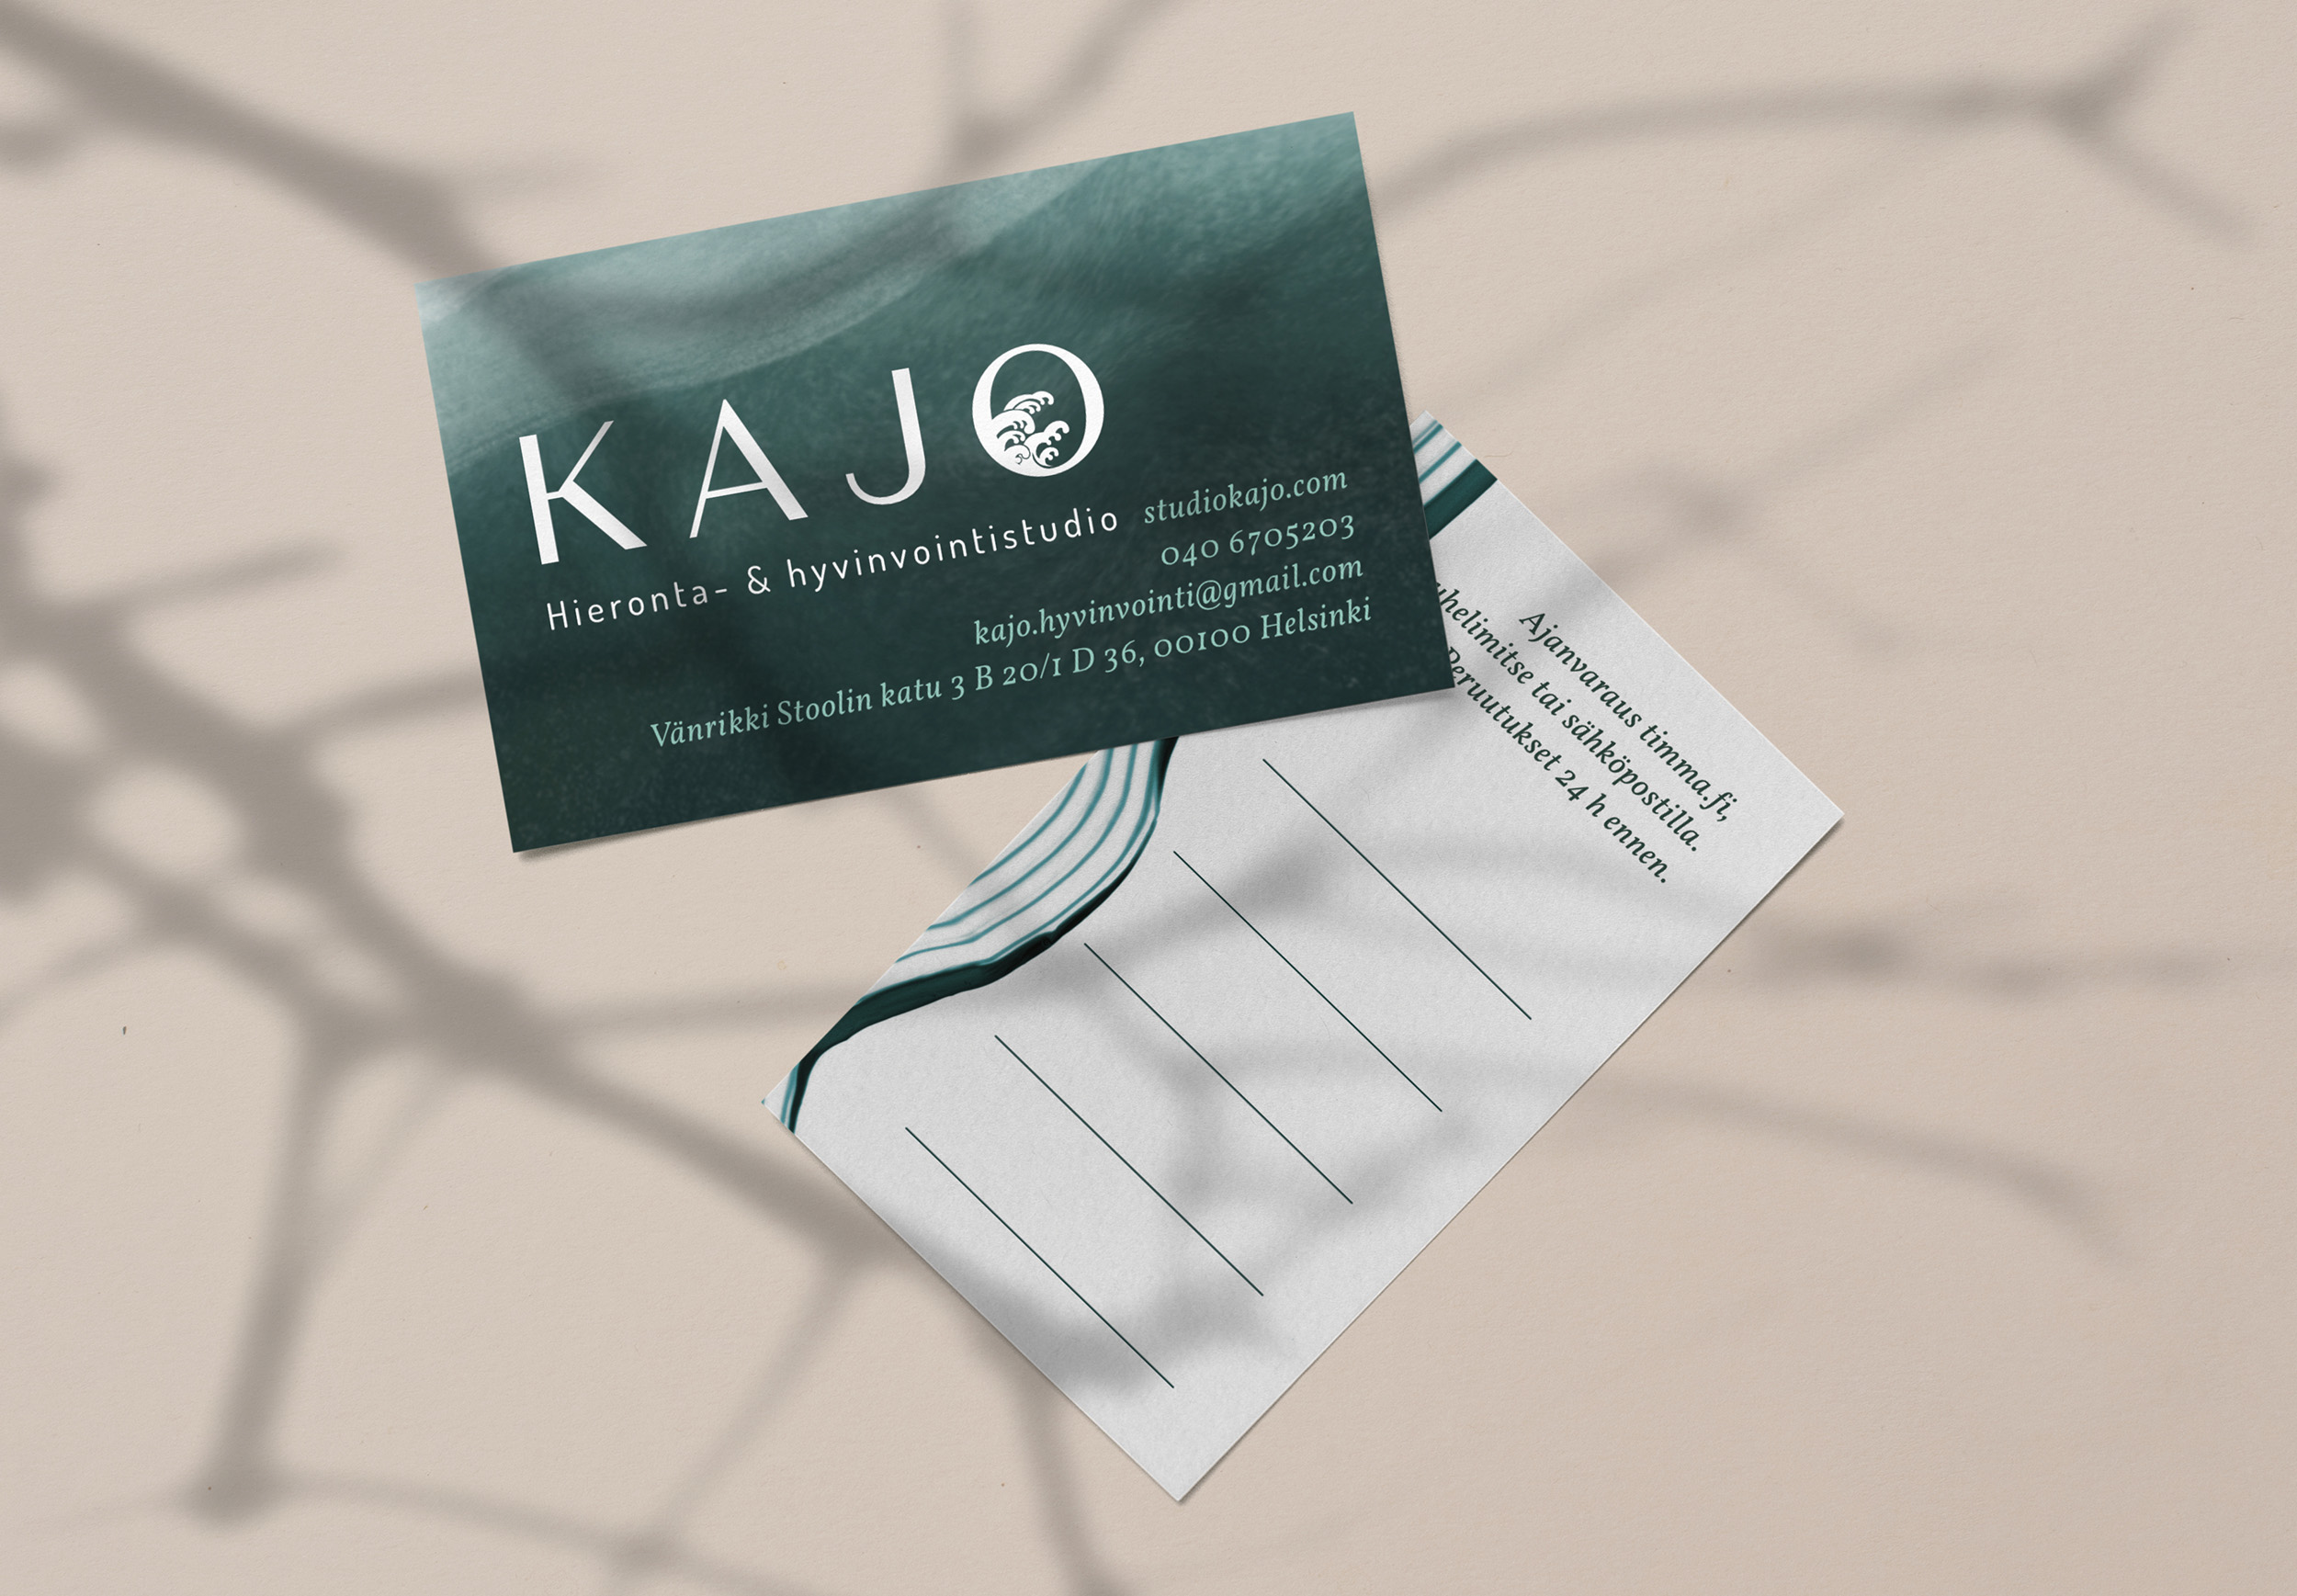 Mockups of the front and back of the business card design on a peach-colored background.